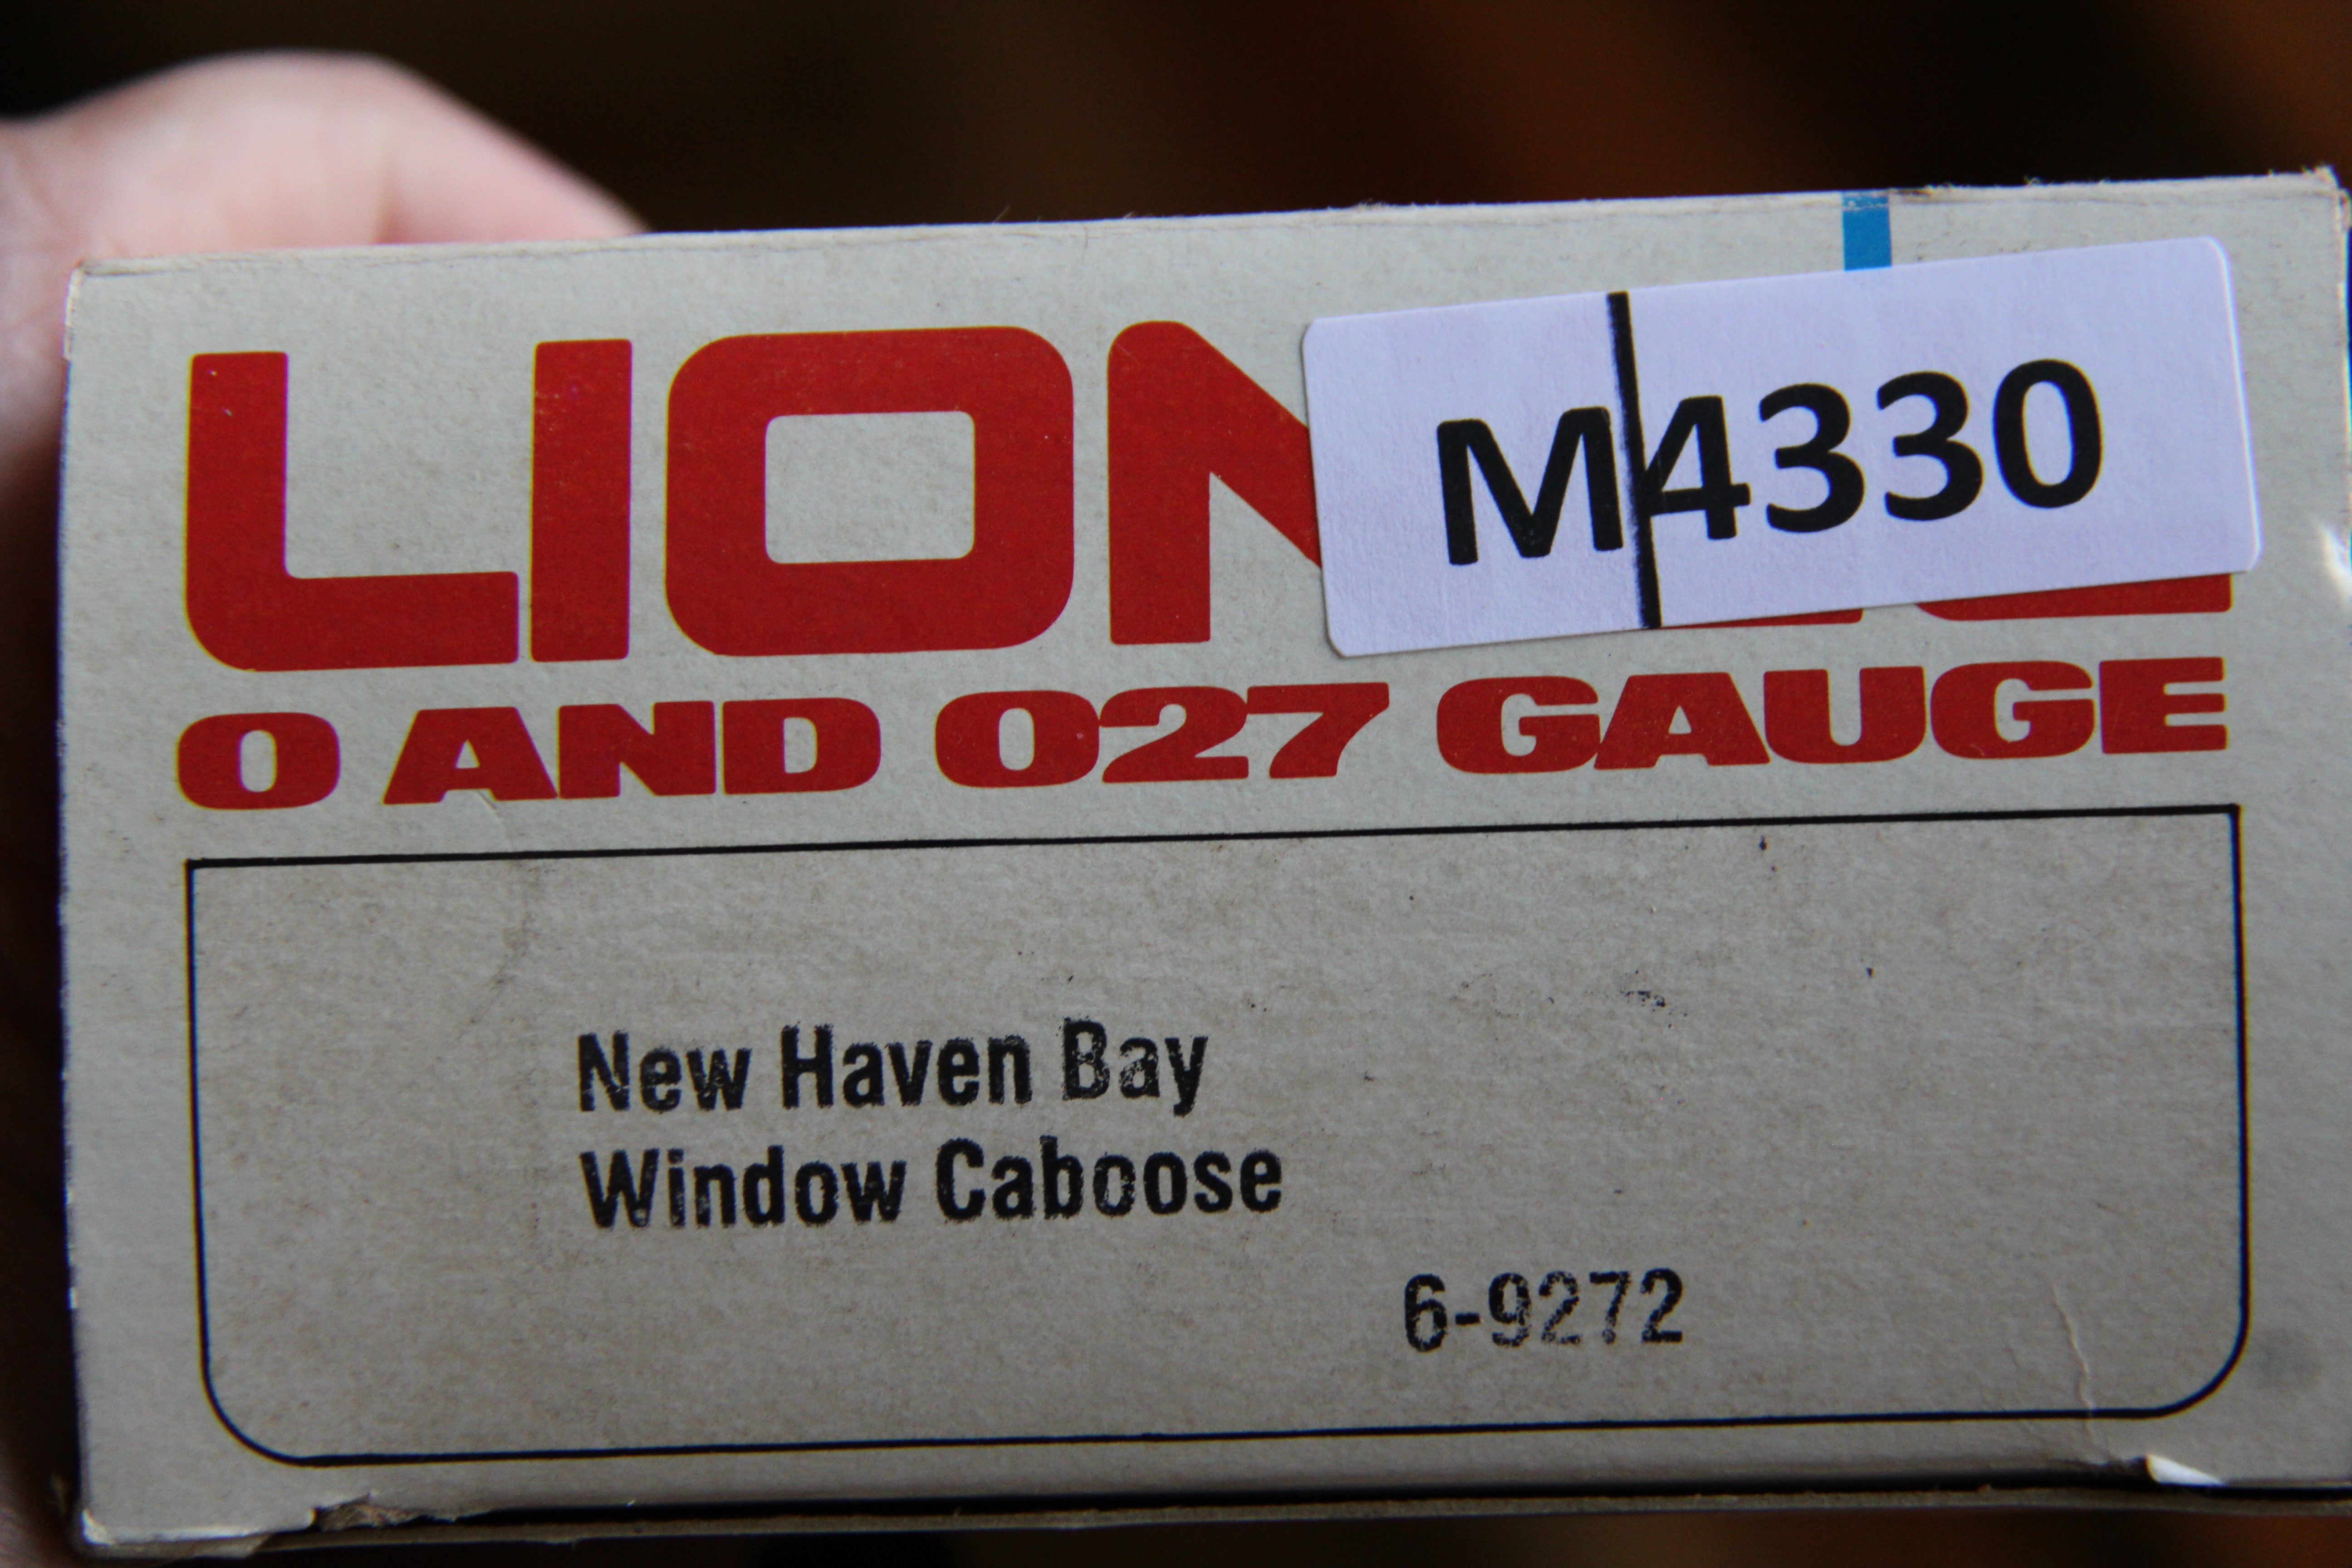 Lionel 6-9272 New Haven Bay Window Caboose-Second hand-M4330